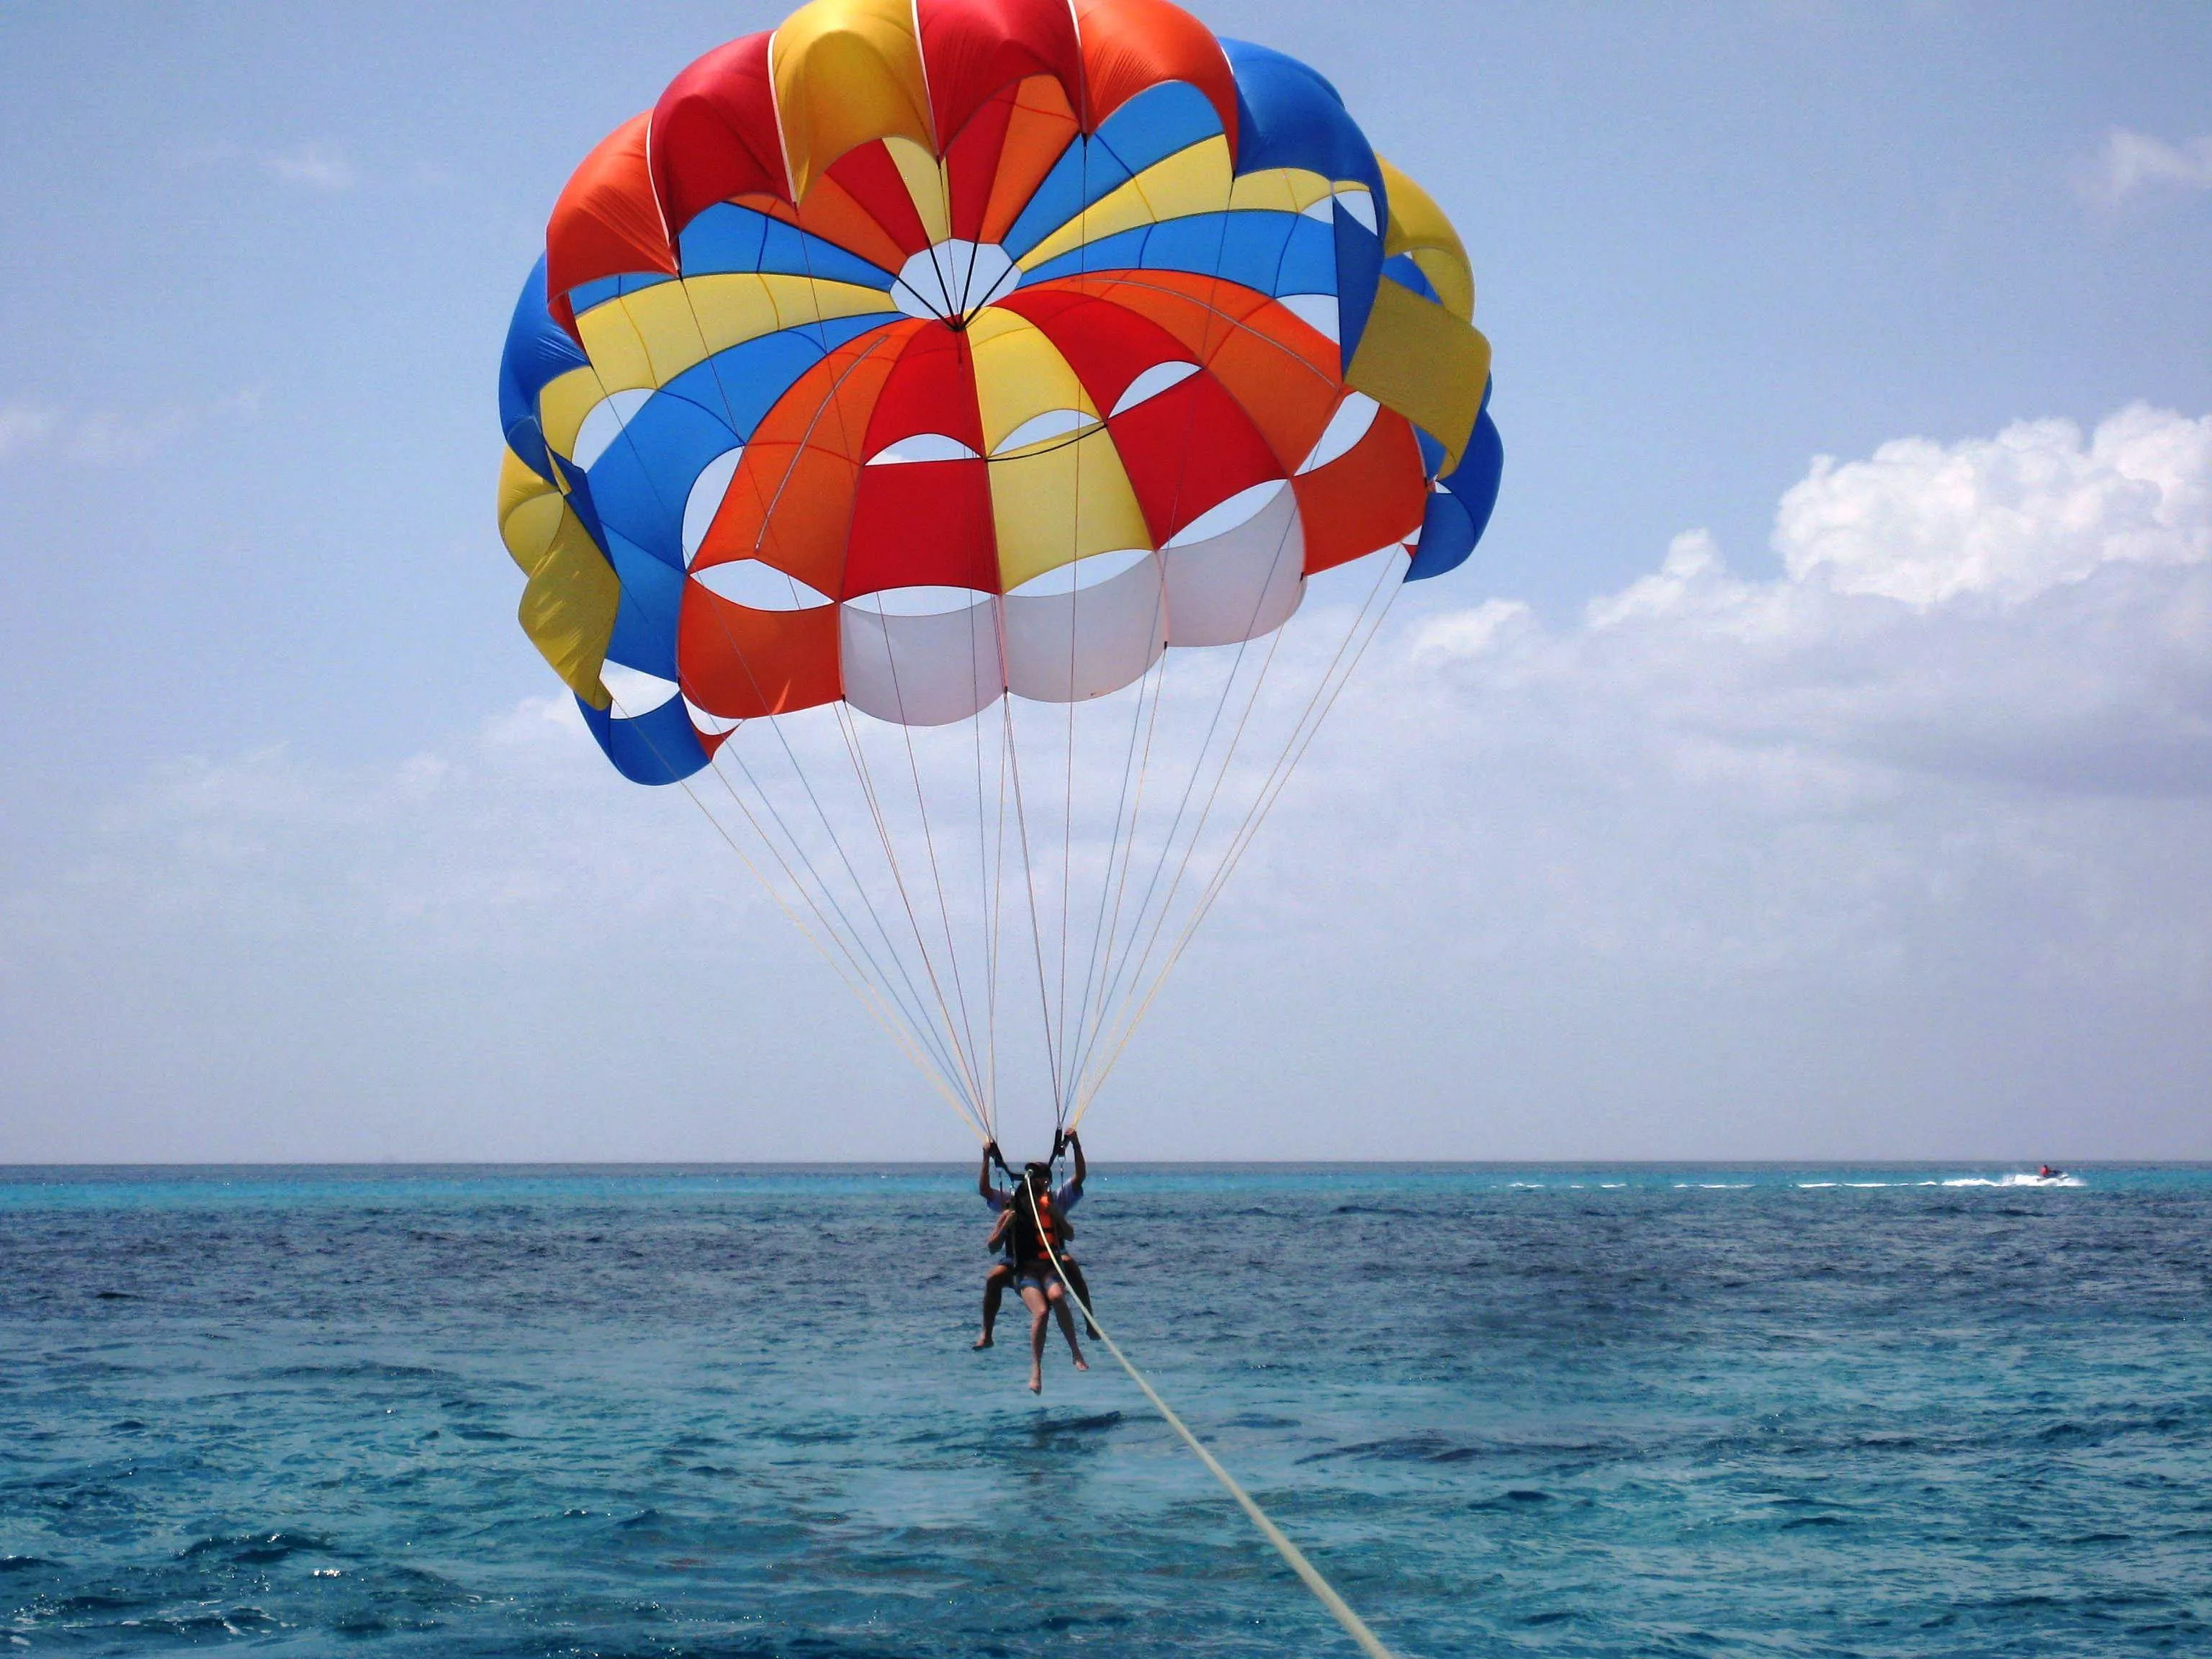 Red Sea Parasailing in Israel, Middle East | Parasailing - Rated 0.8